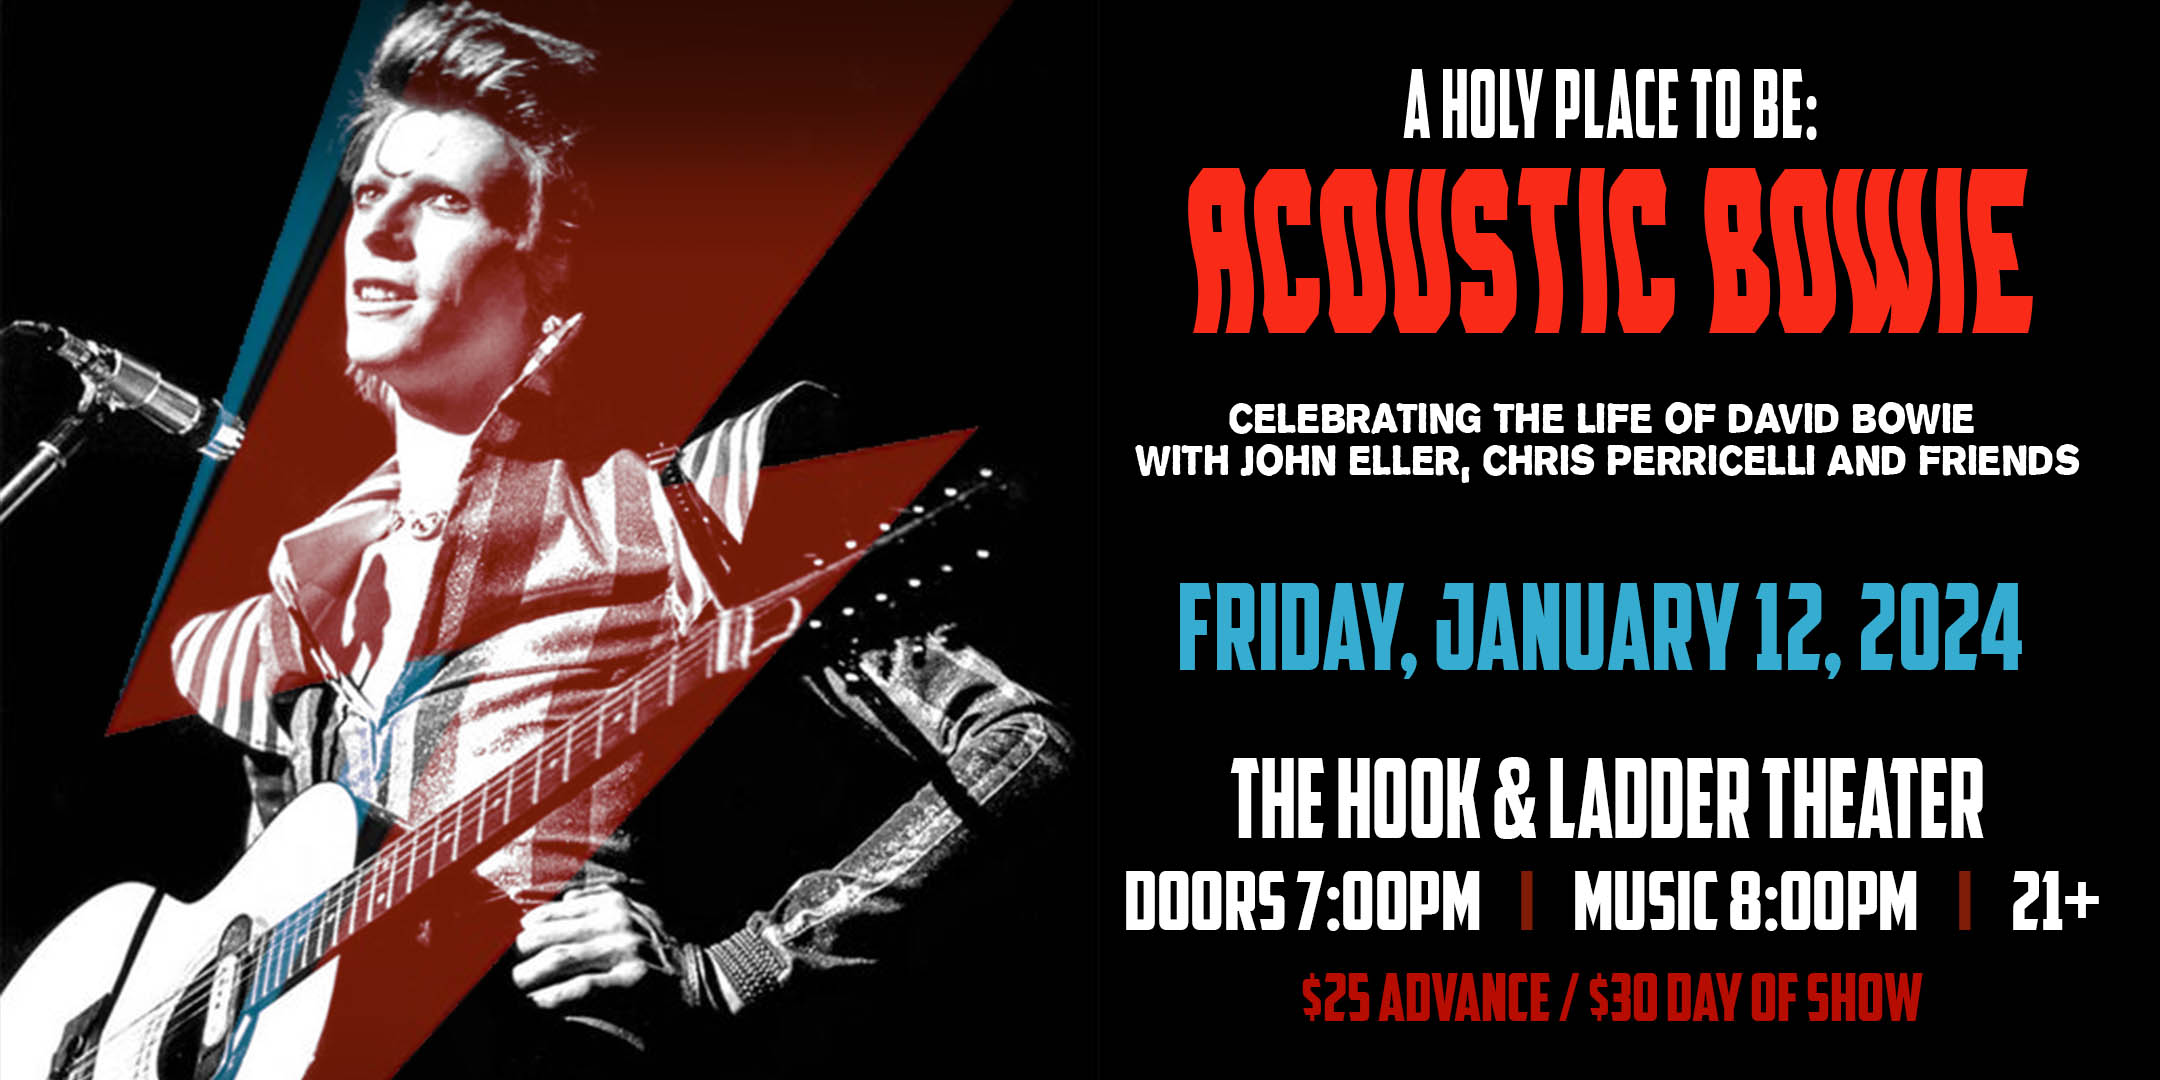 A Holy Place To Be: Acoustic Bowie Celebrating The Life Of David Bowie with John Eller, Chris Perricelli and Friends Friday, January 12, 2024 The Hook & Ladder Theater Doors 7:00pm :: Music 8:00pm :: 21+ VIP Reserved Seating: $38 General Admission: $25 ADV / $30 DOS